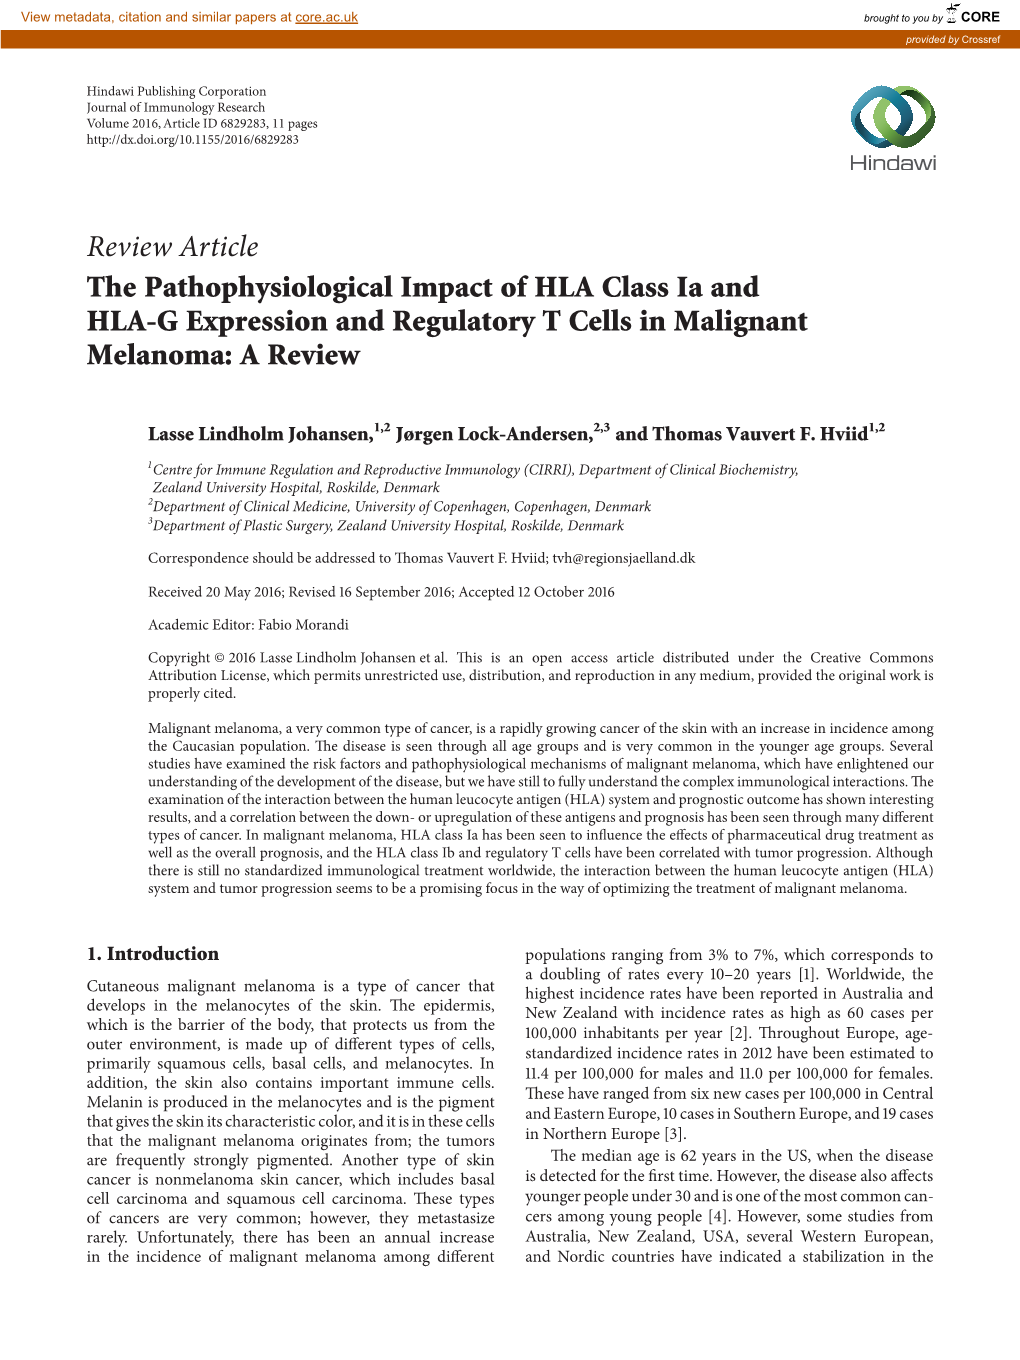 Review Article the Pathophysiological Impact of HLA Class Ia and HLA-G Expression and Regulatory T Cells in Malignant Melanoma: a Review